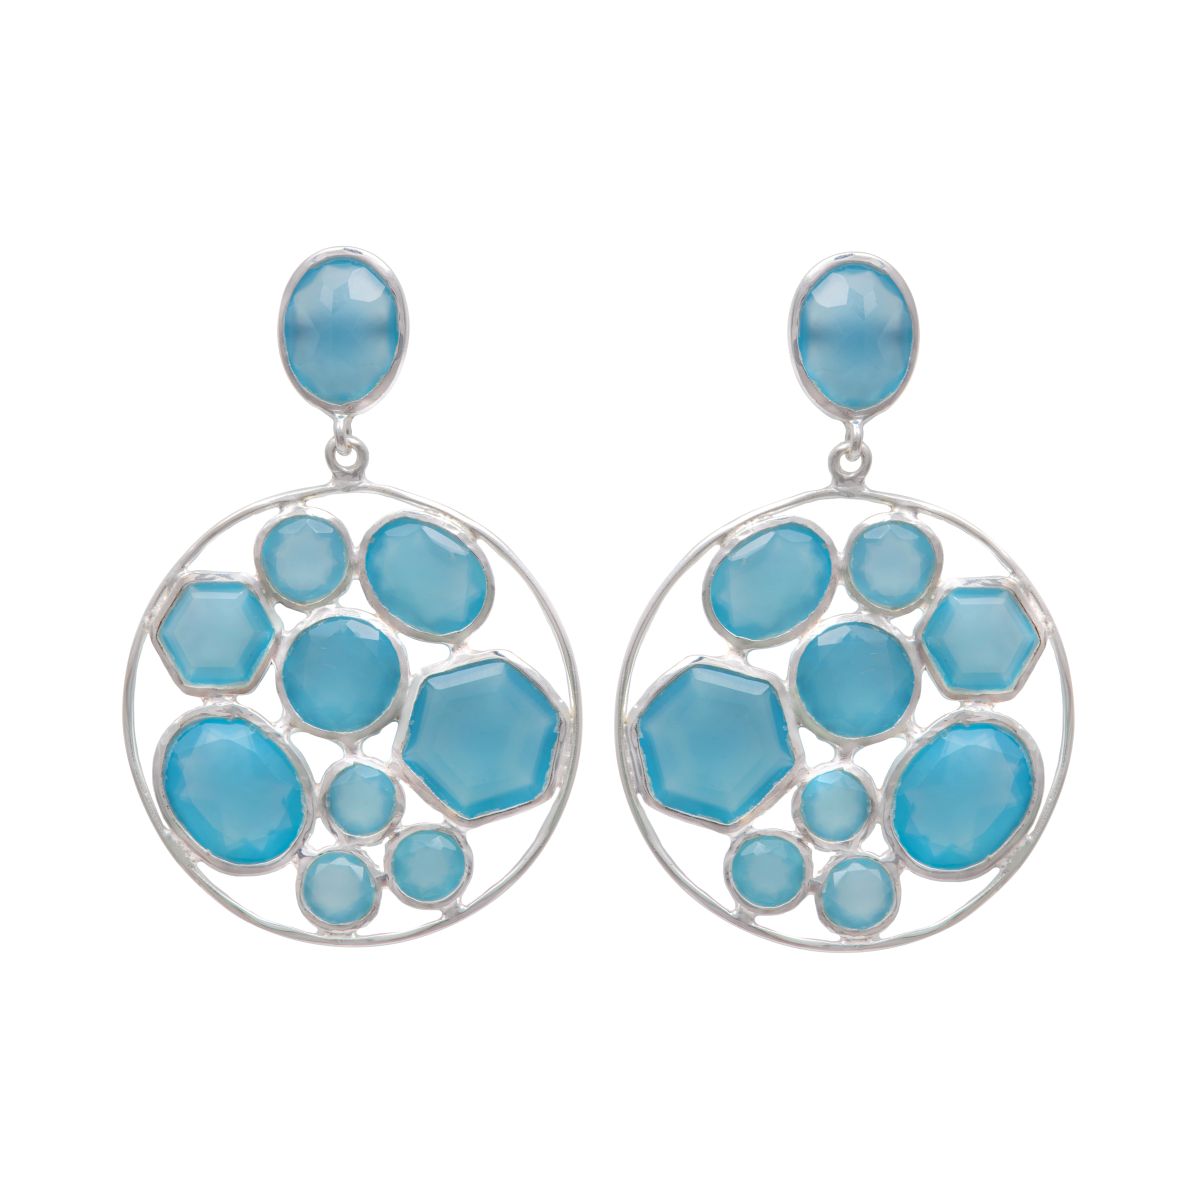 Long Gemstone Earrings with a Round Disc Drop with Stones in Sterling Silver - Aqua Chalcedony and Blue Topaz